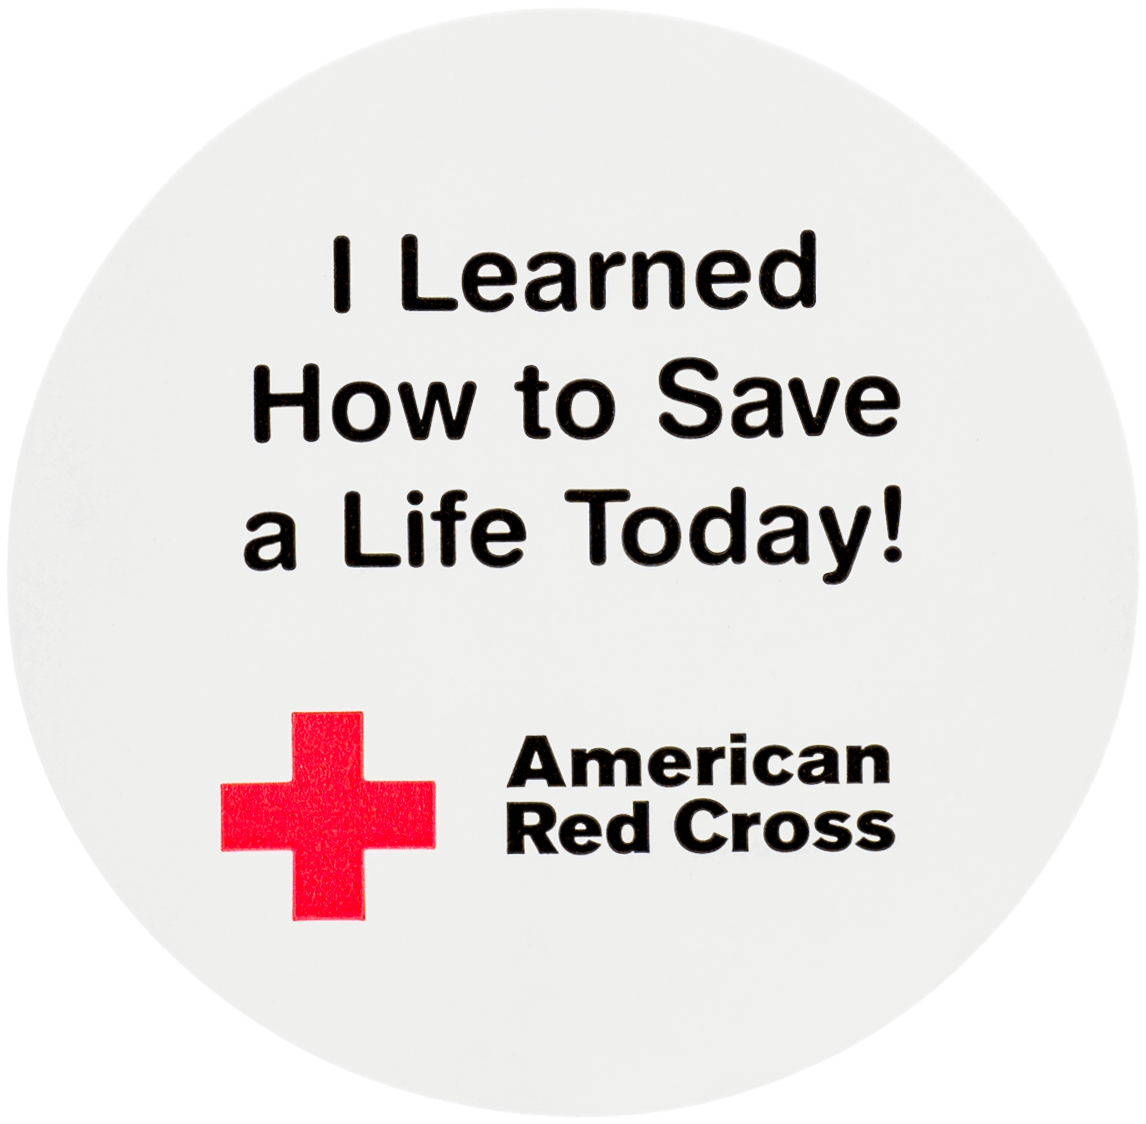 A White Circle With Black Text And Red Cross